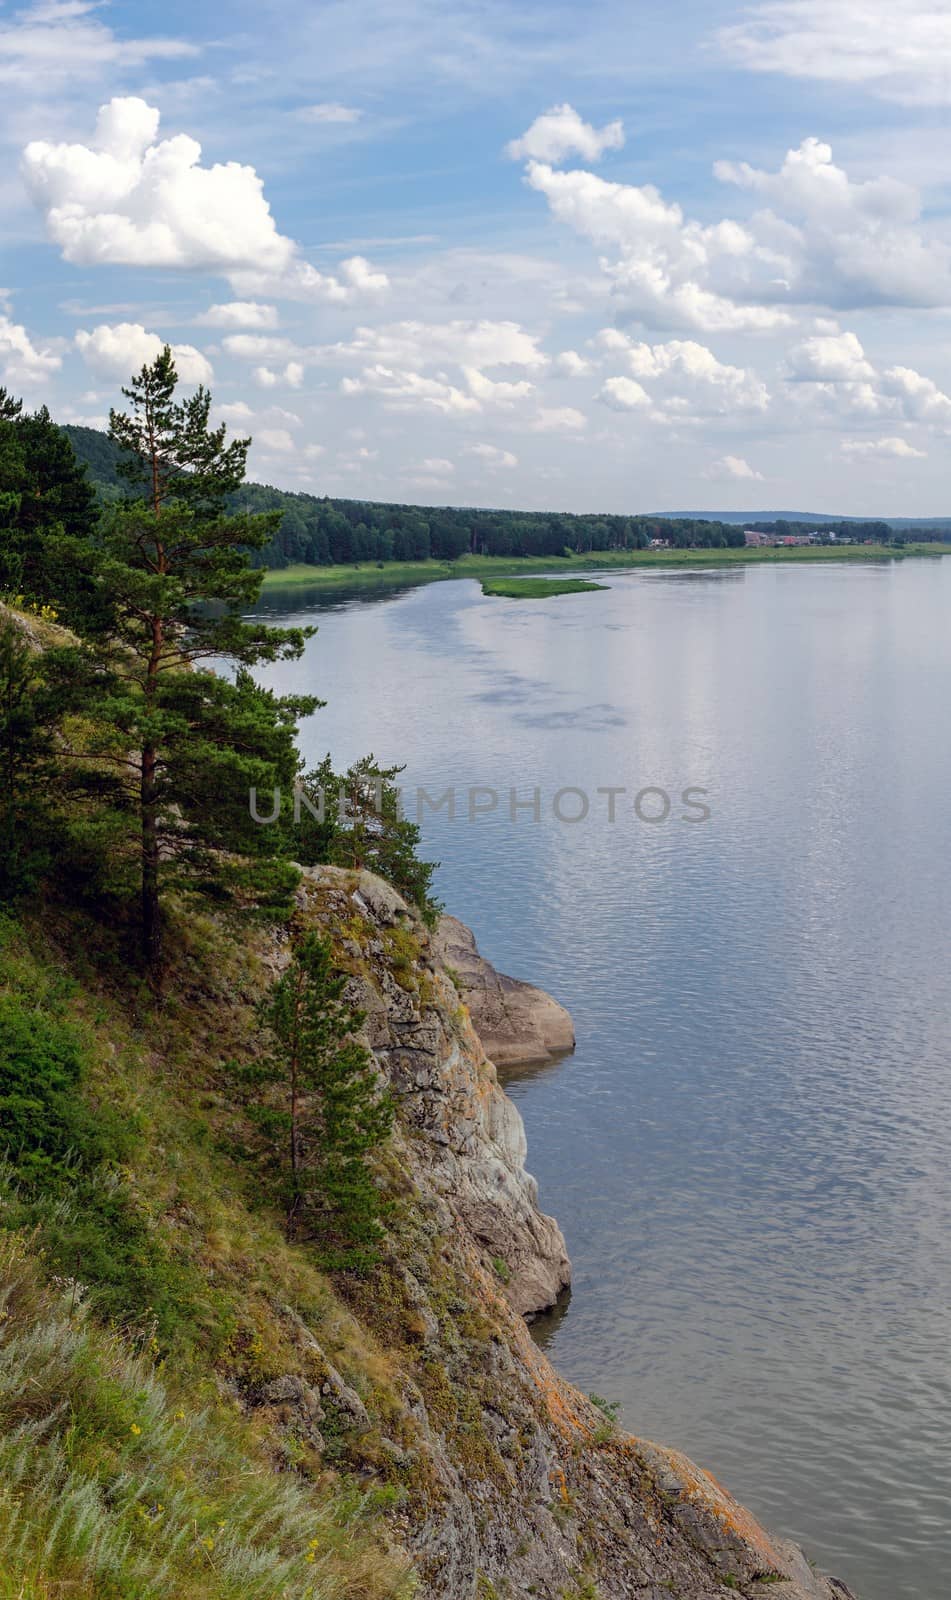 Siberian river Tom in the forest. by rainfallsup